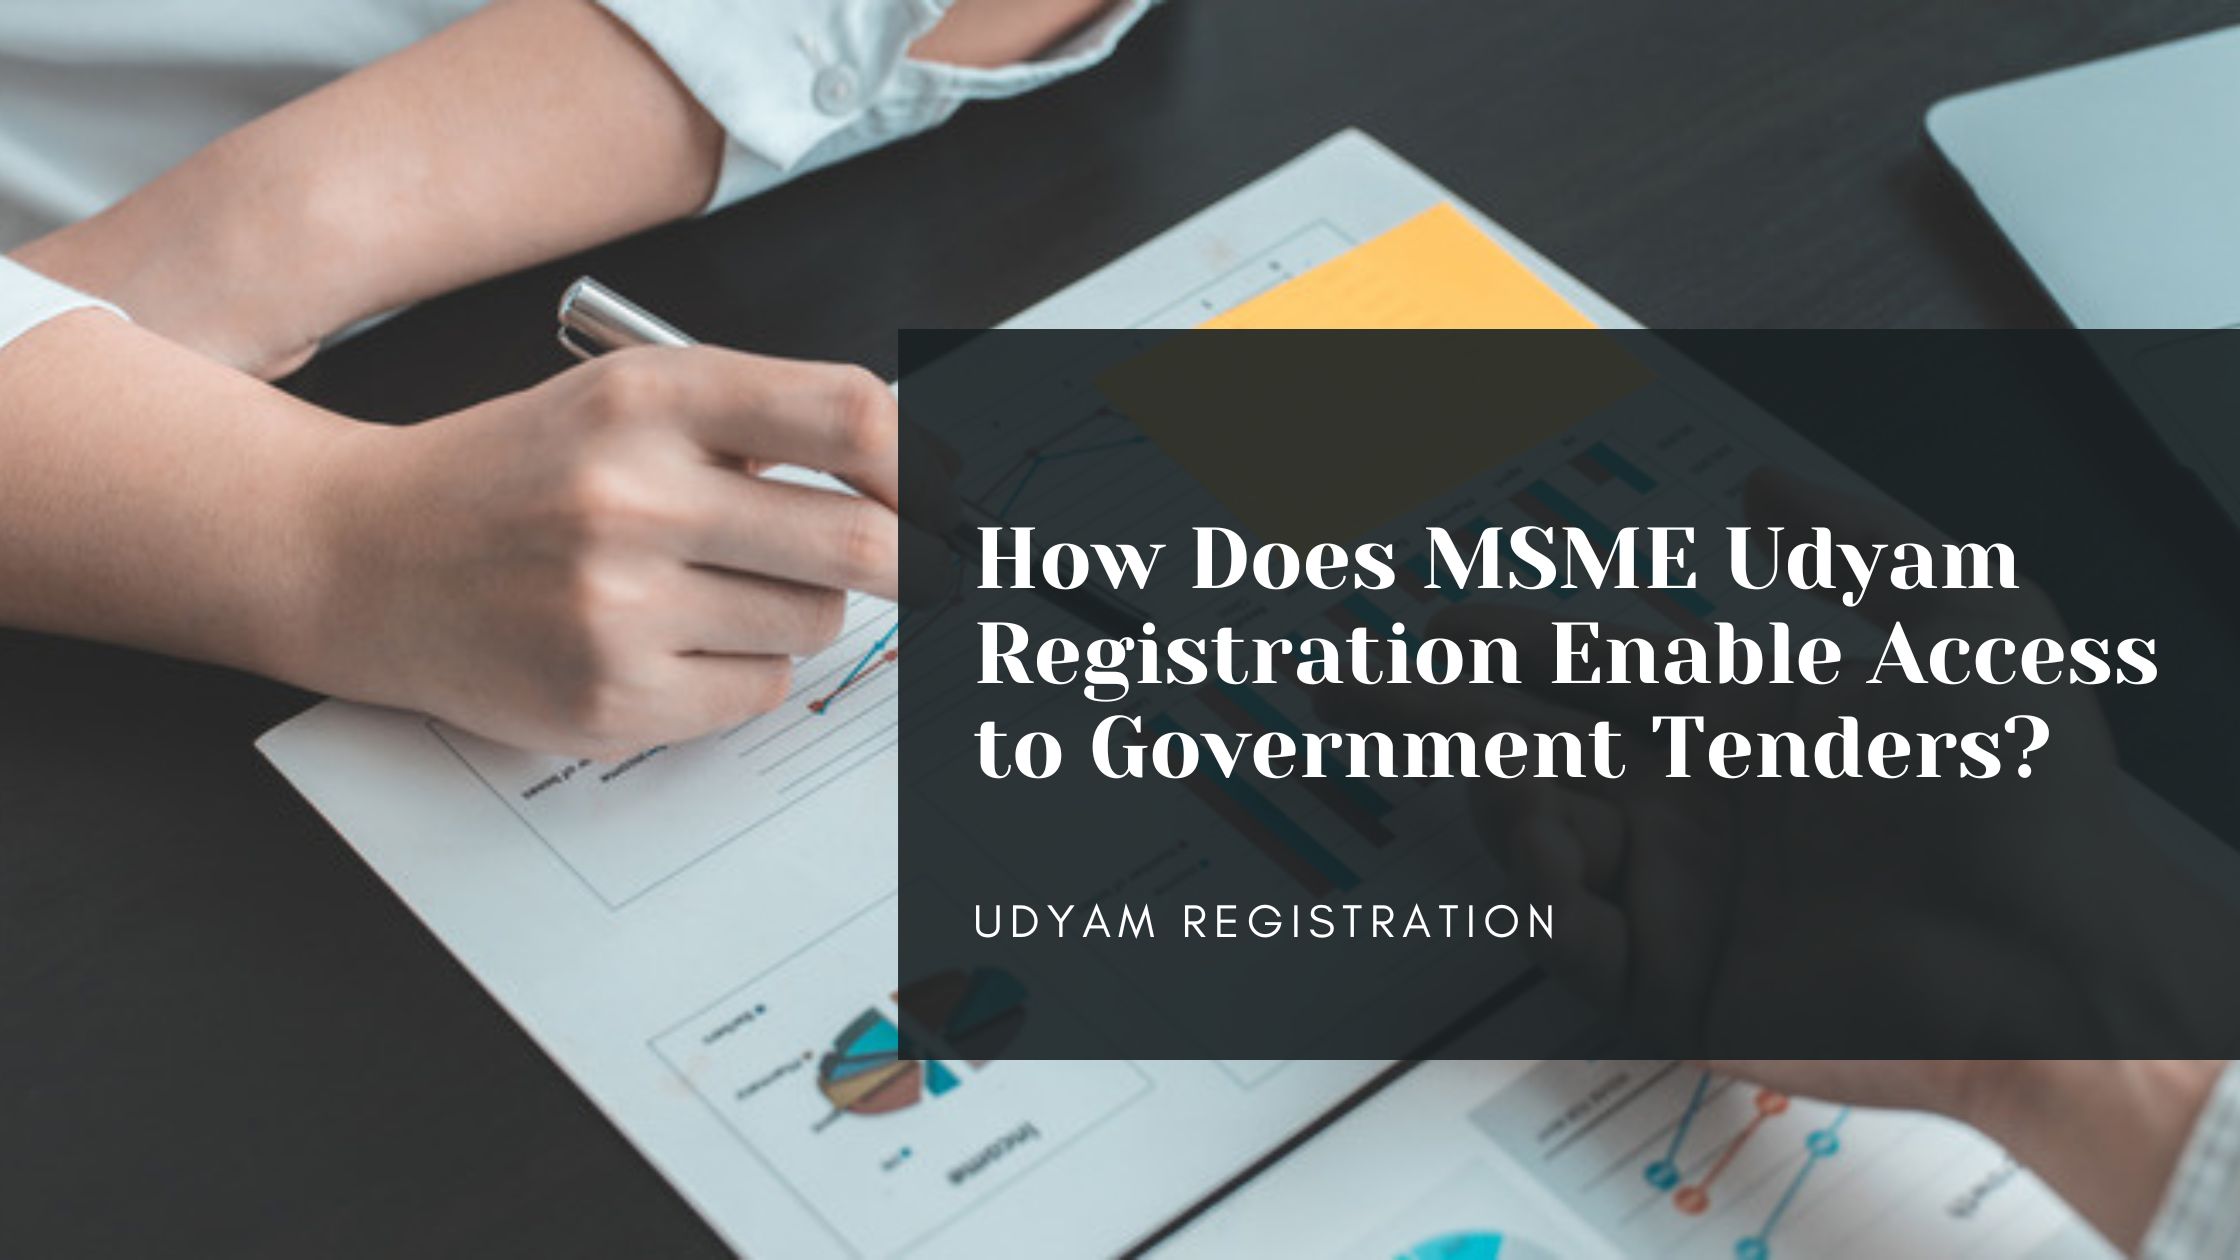 How Does MSME Udyam Registration Enable Access to Government Tenders?